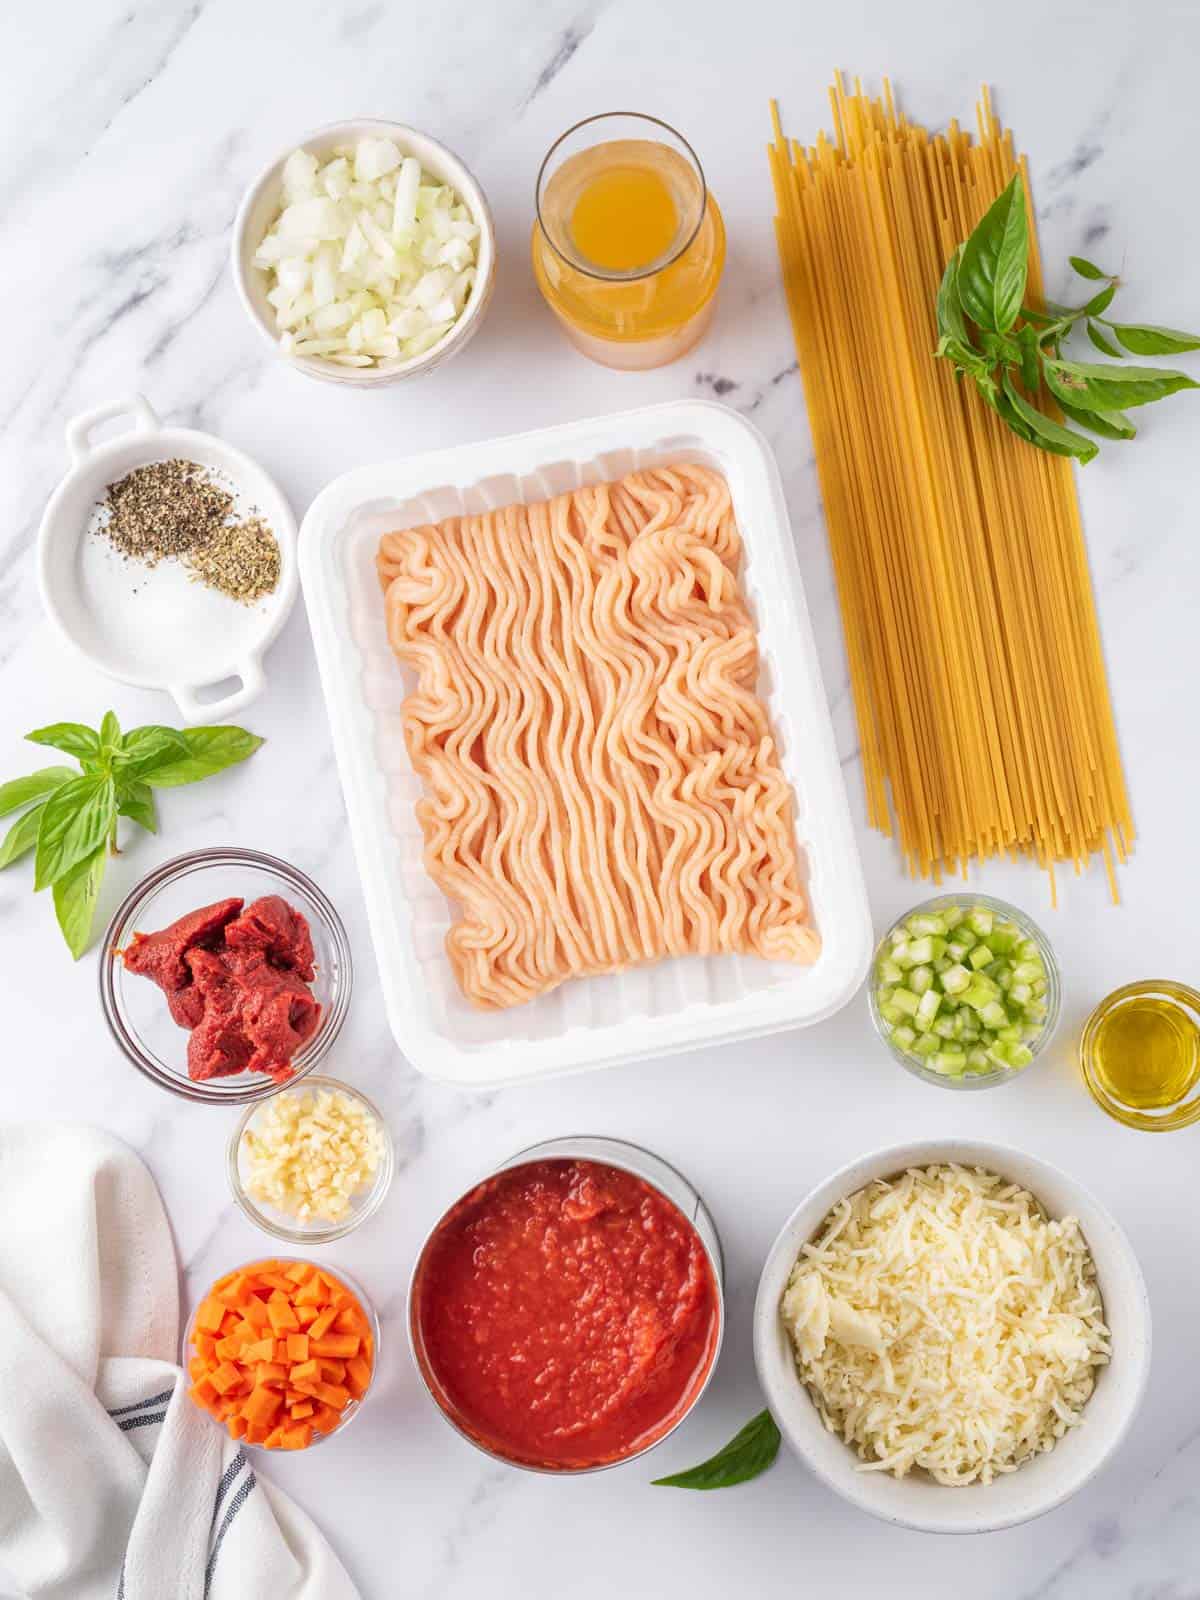 ingredients of the baked spaghetti shown